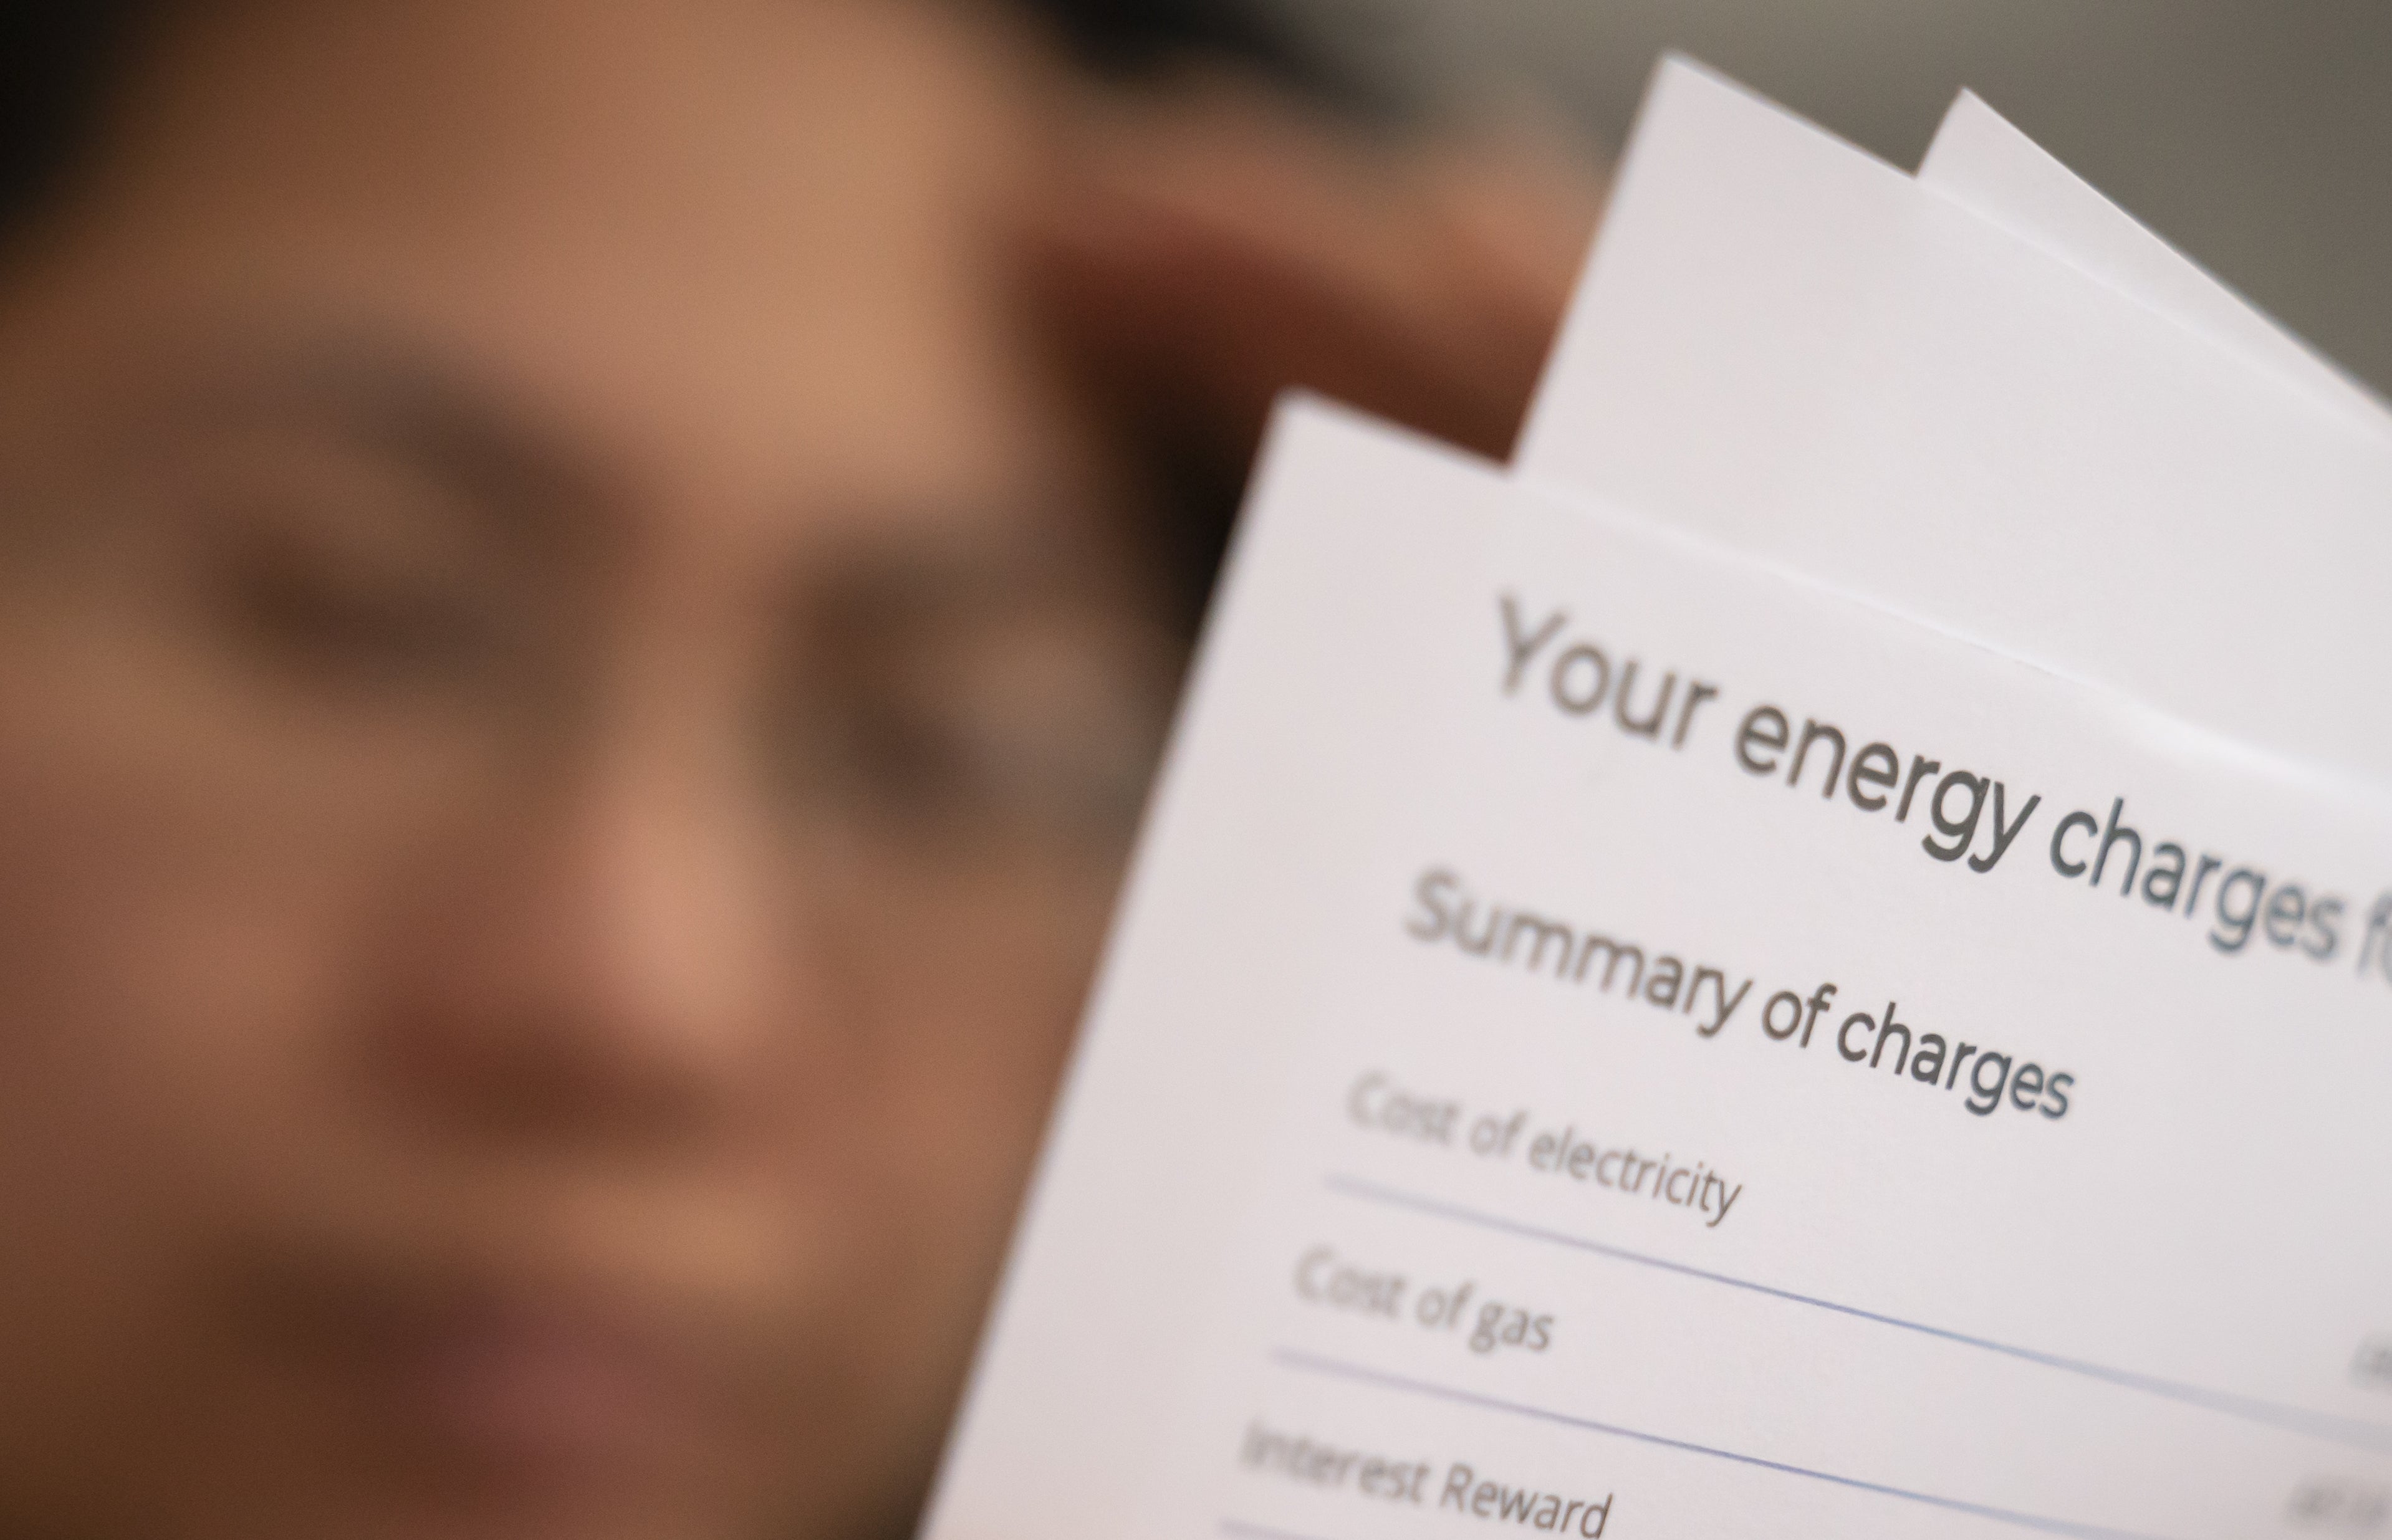 The overall energy debt bill is already three times higher than it was a year ago, experts at Uswitch said (Danny Lawson/PA)